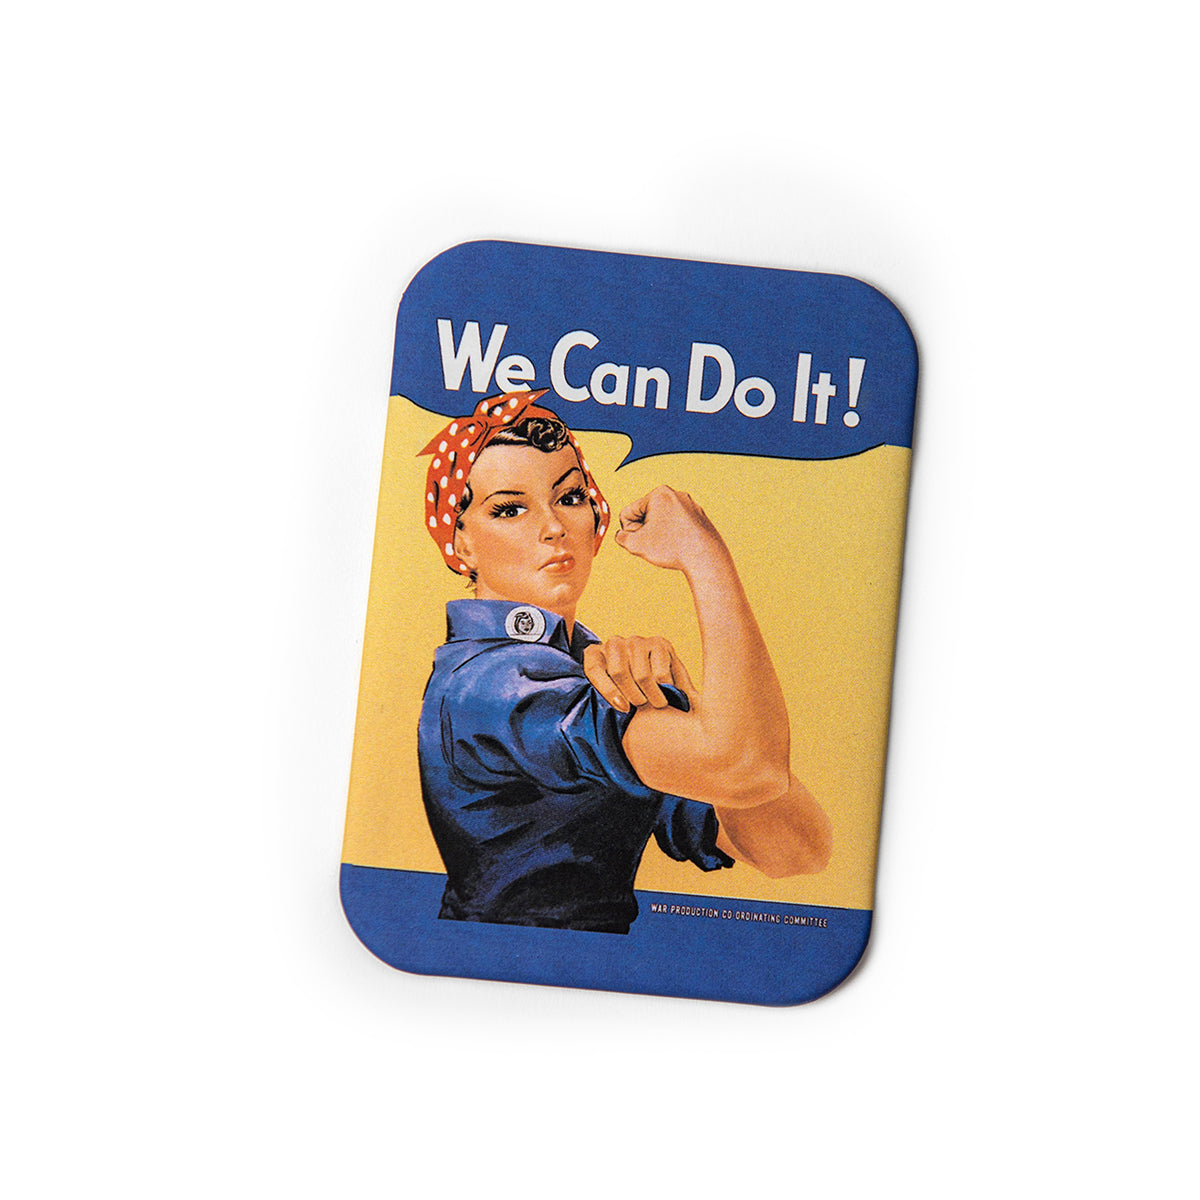 Rosie the Riveter “We Can Do It!” Magnet – Shop at the Heinz History Center